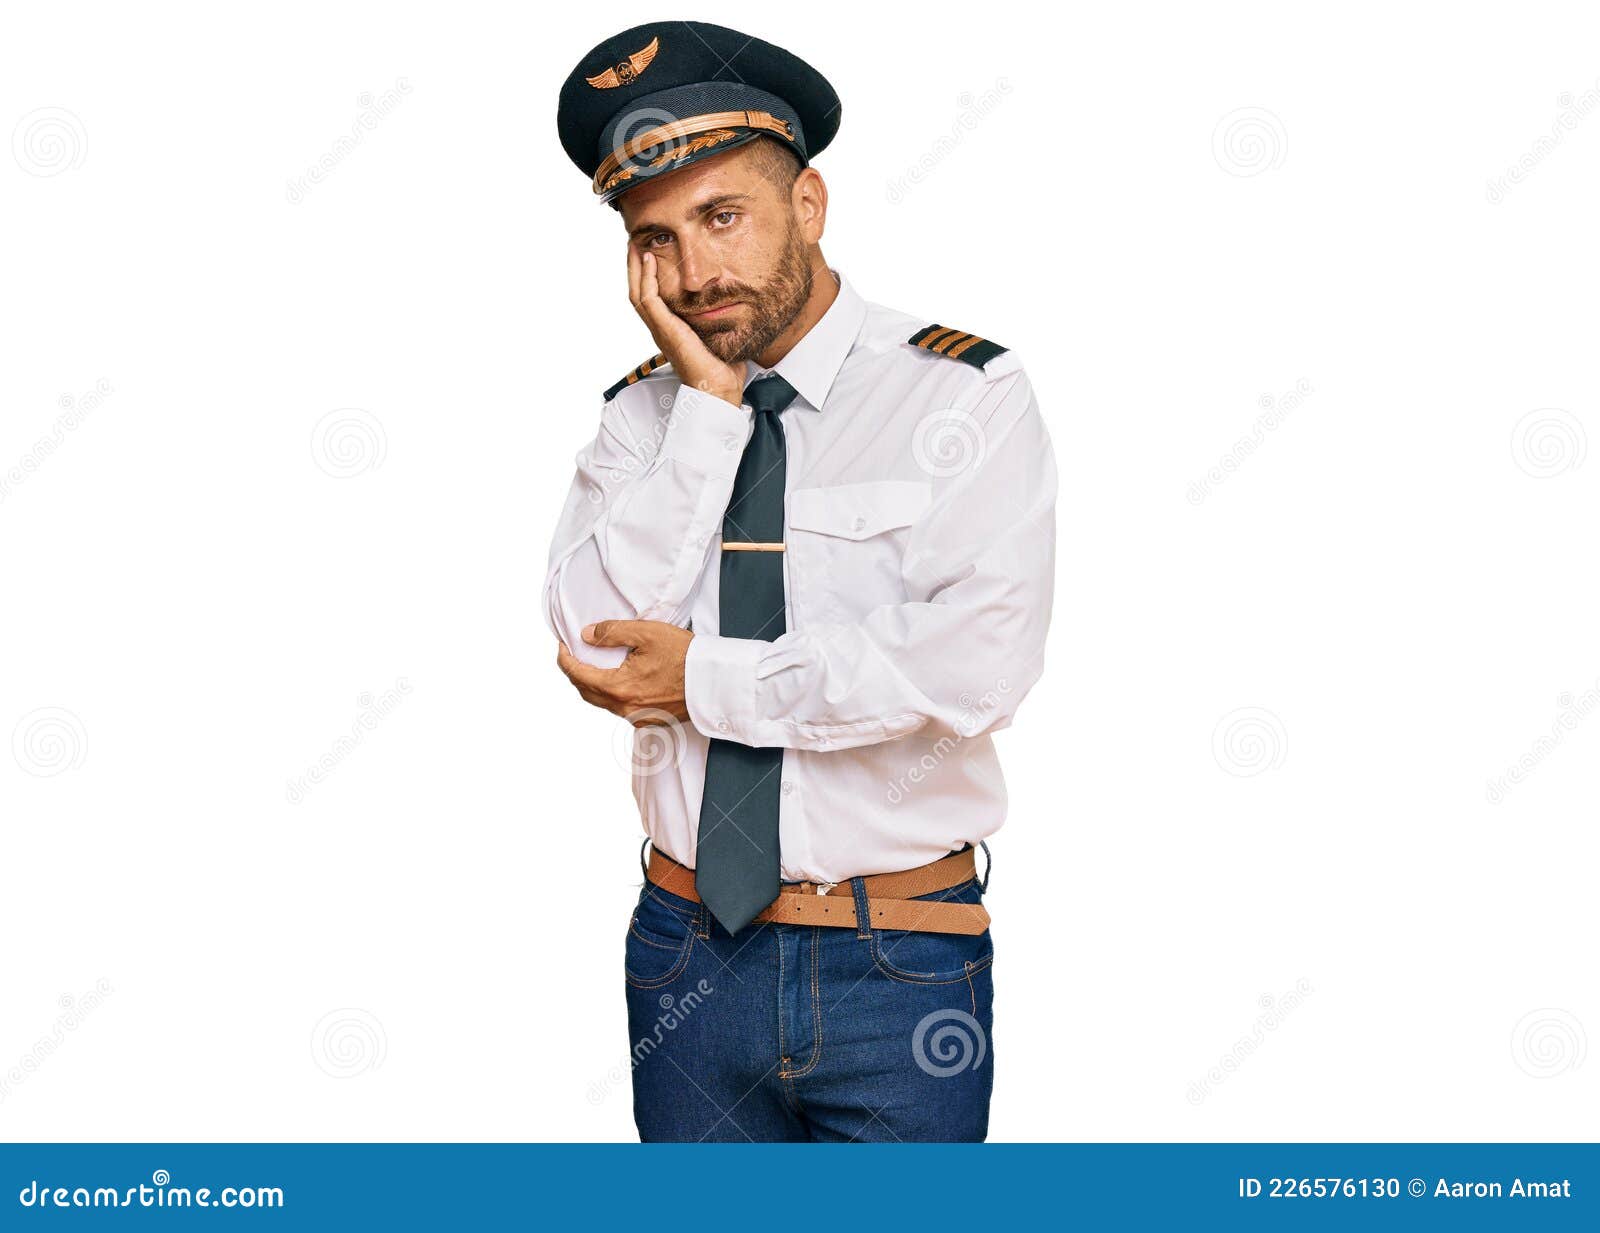 Handsome Man with Beard Wearing Airplane Pilot Uniform Thinking Looking ...